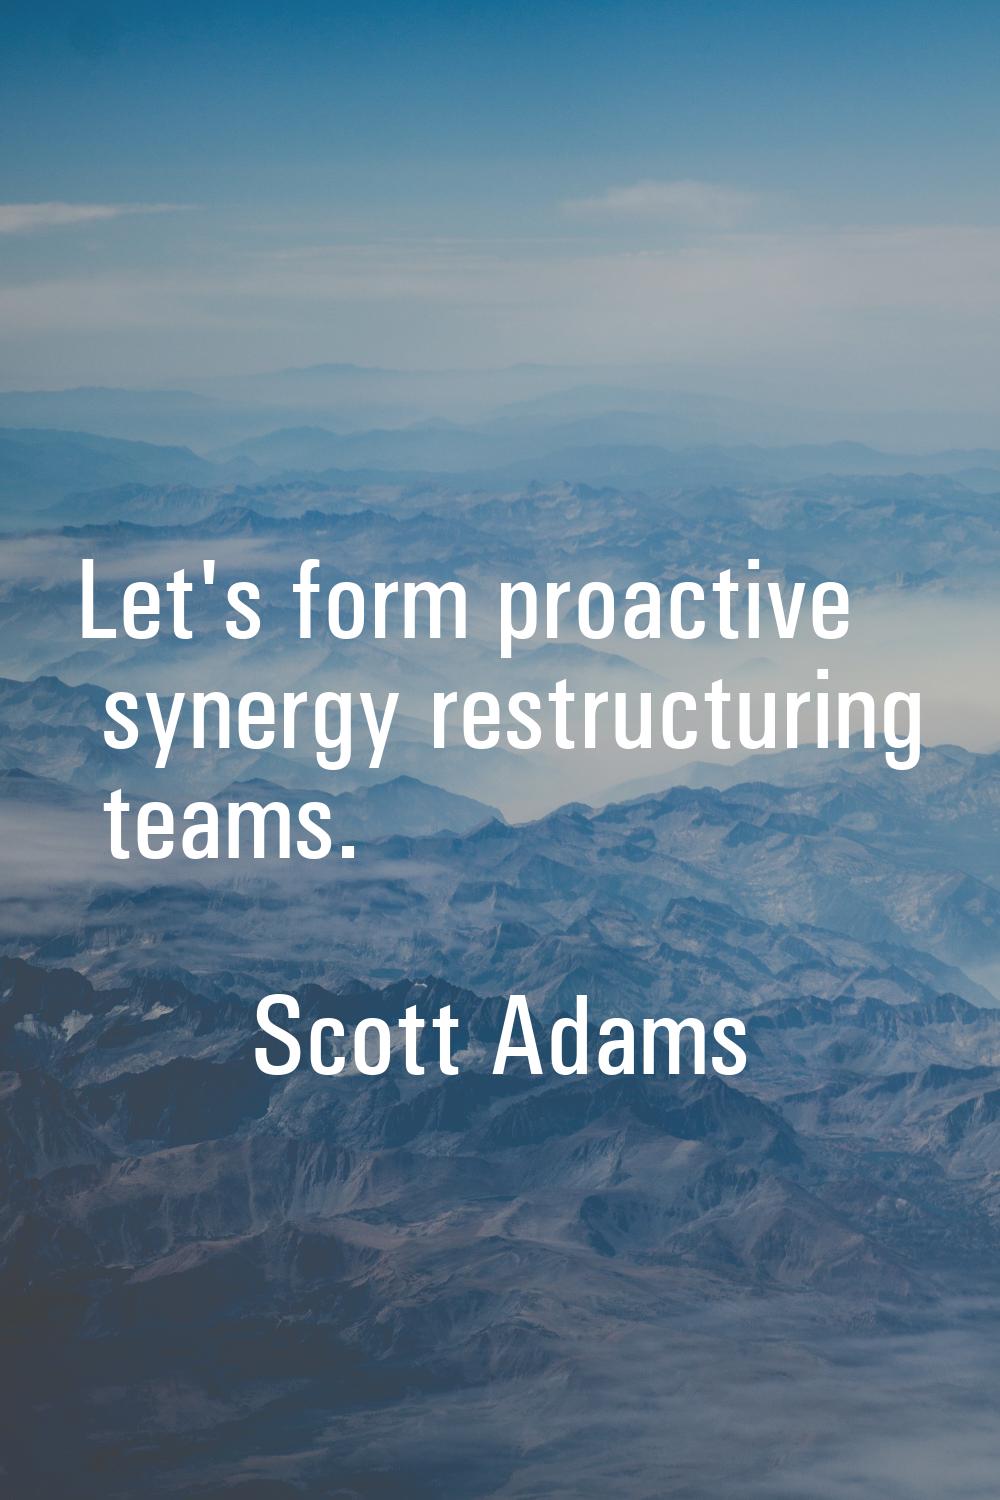 Let's form proactive synergy restructuring teams.